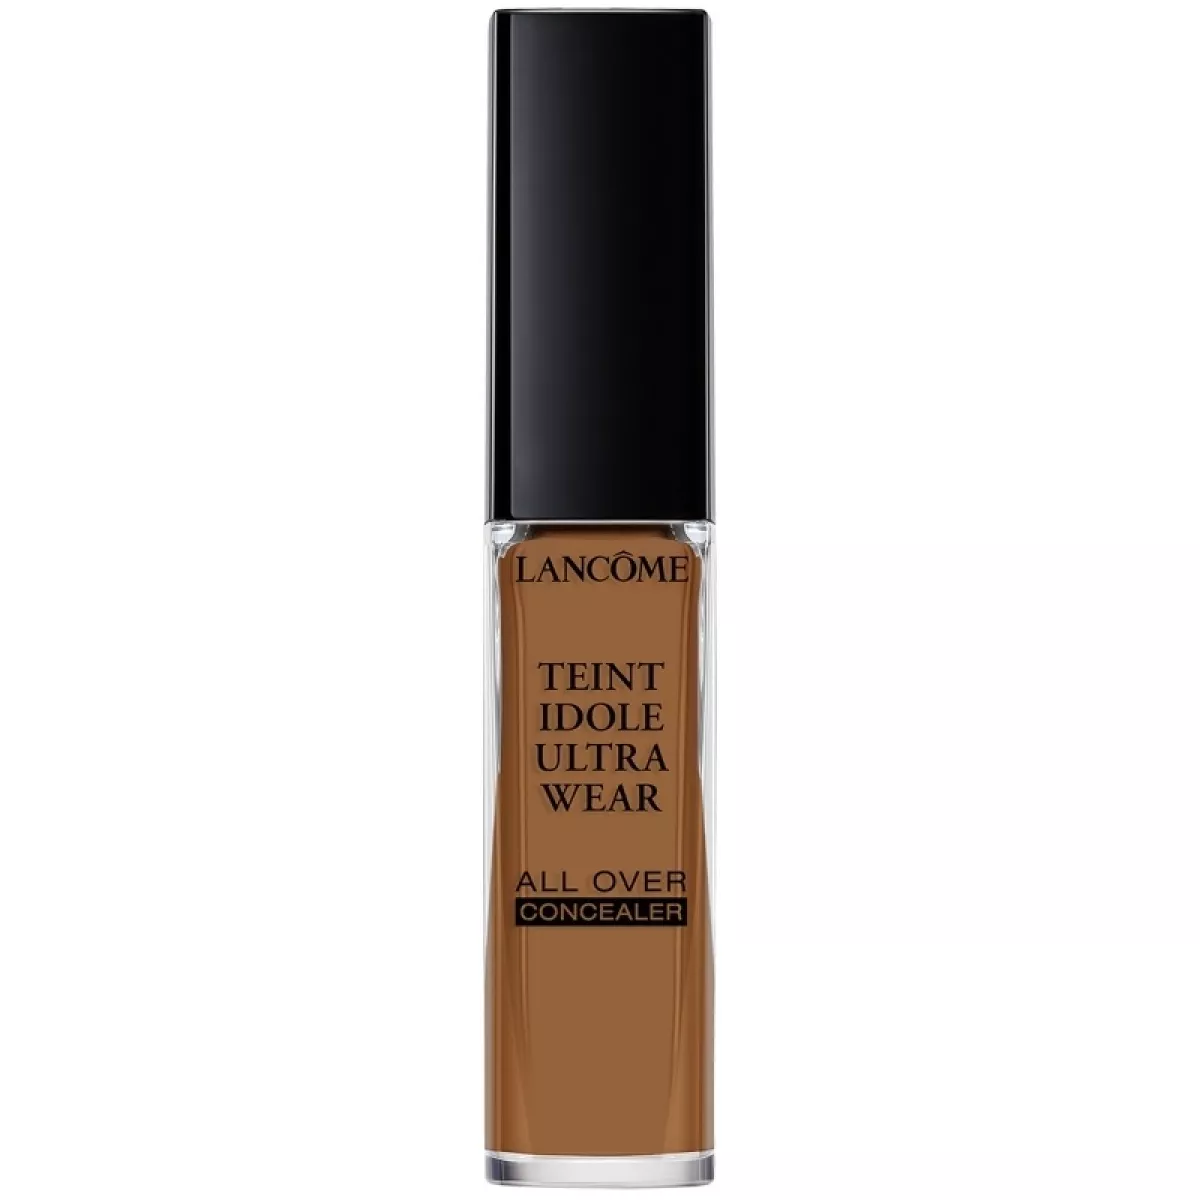 #1 - Lancome Teint Idole Ultra Wear All Over Concealer 13 ml - 11 Muscade